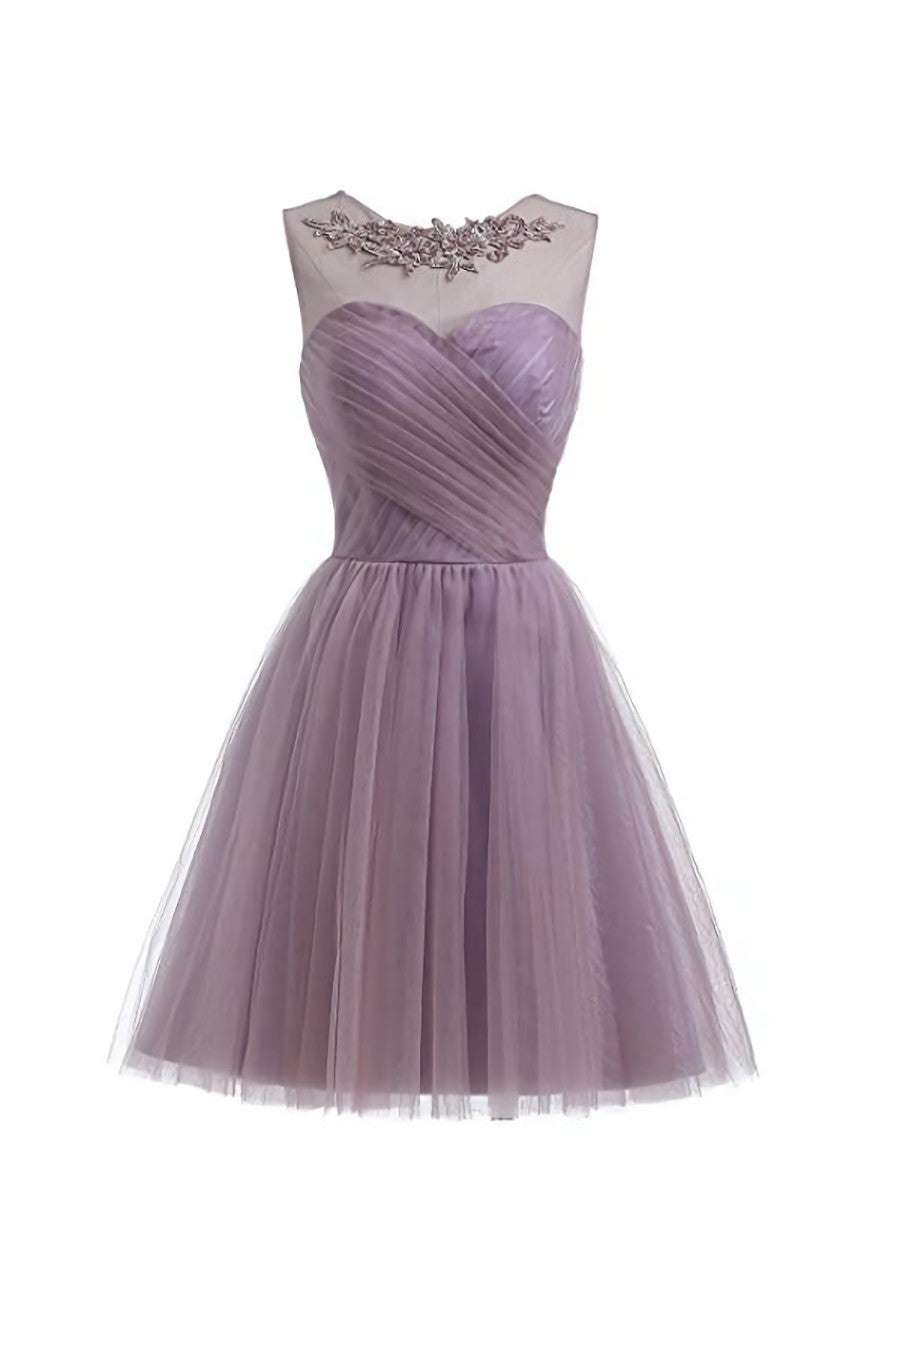 Sweetheart Tulle Corset Homecoming Dresses A Line Scoop Short Corset Prom Dress outfits, Party Dress Dress Up